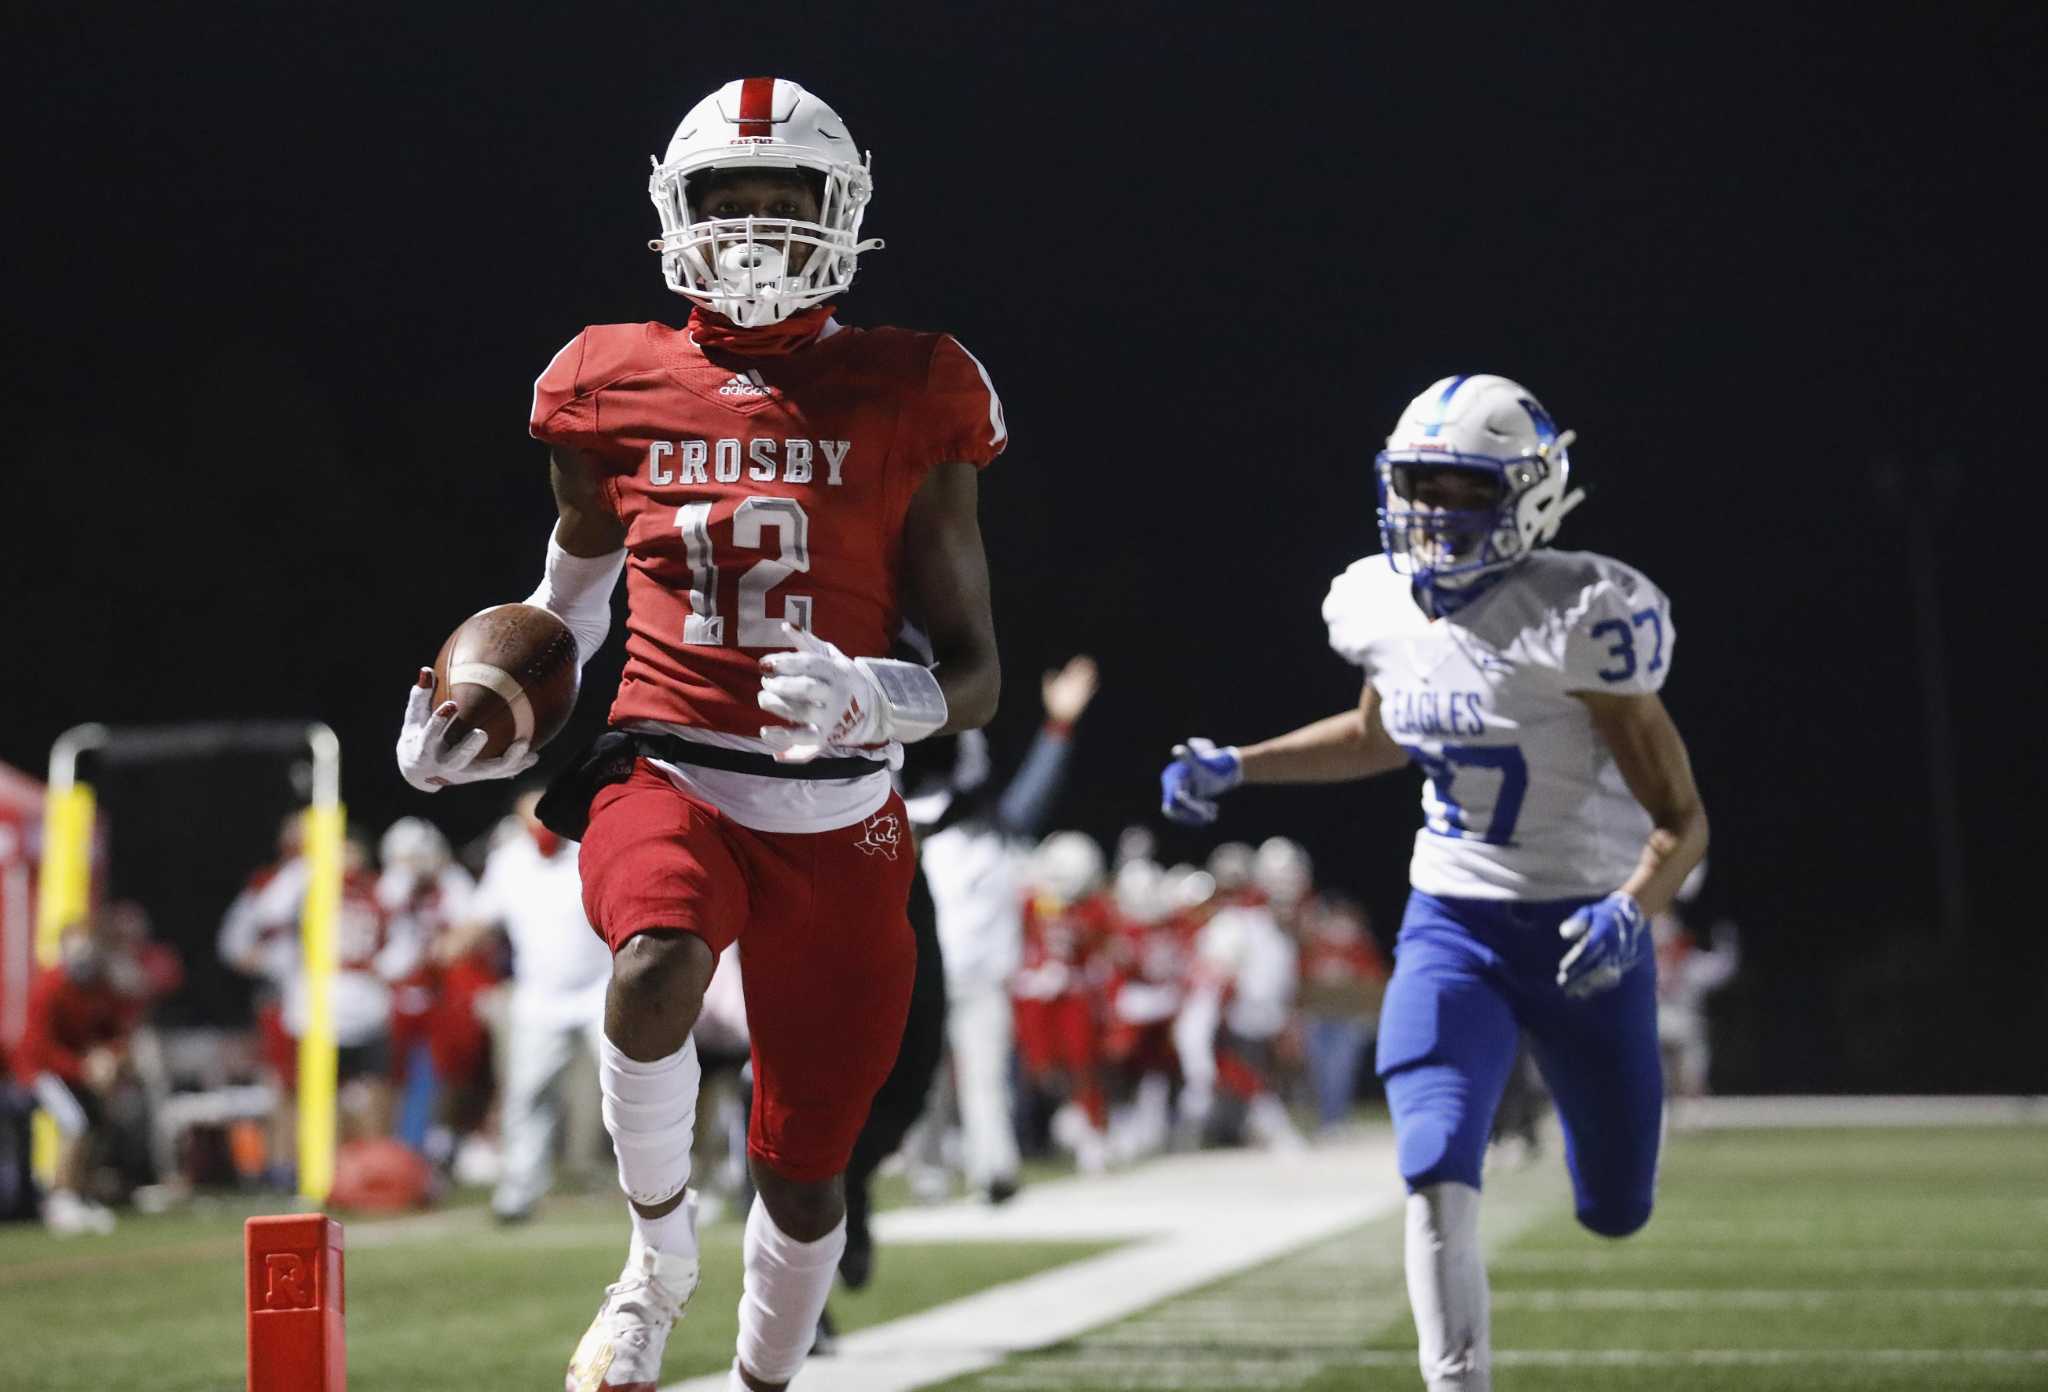 Football: Crosby just needs a win to clinch a district title